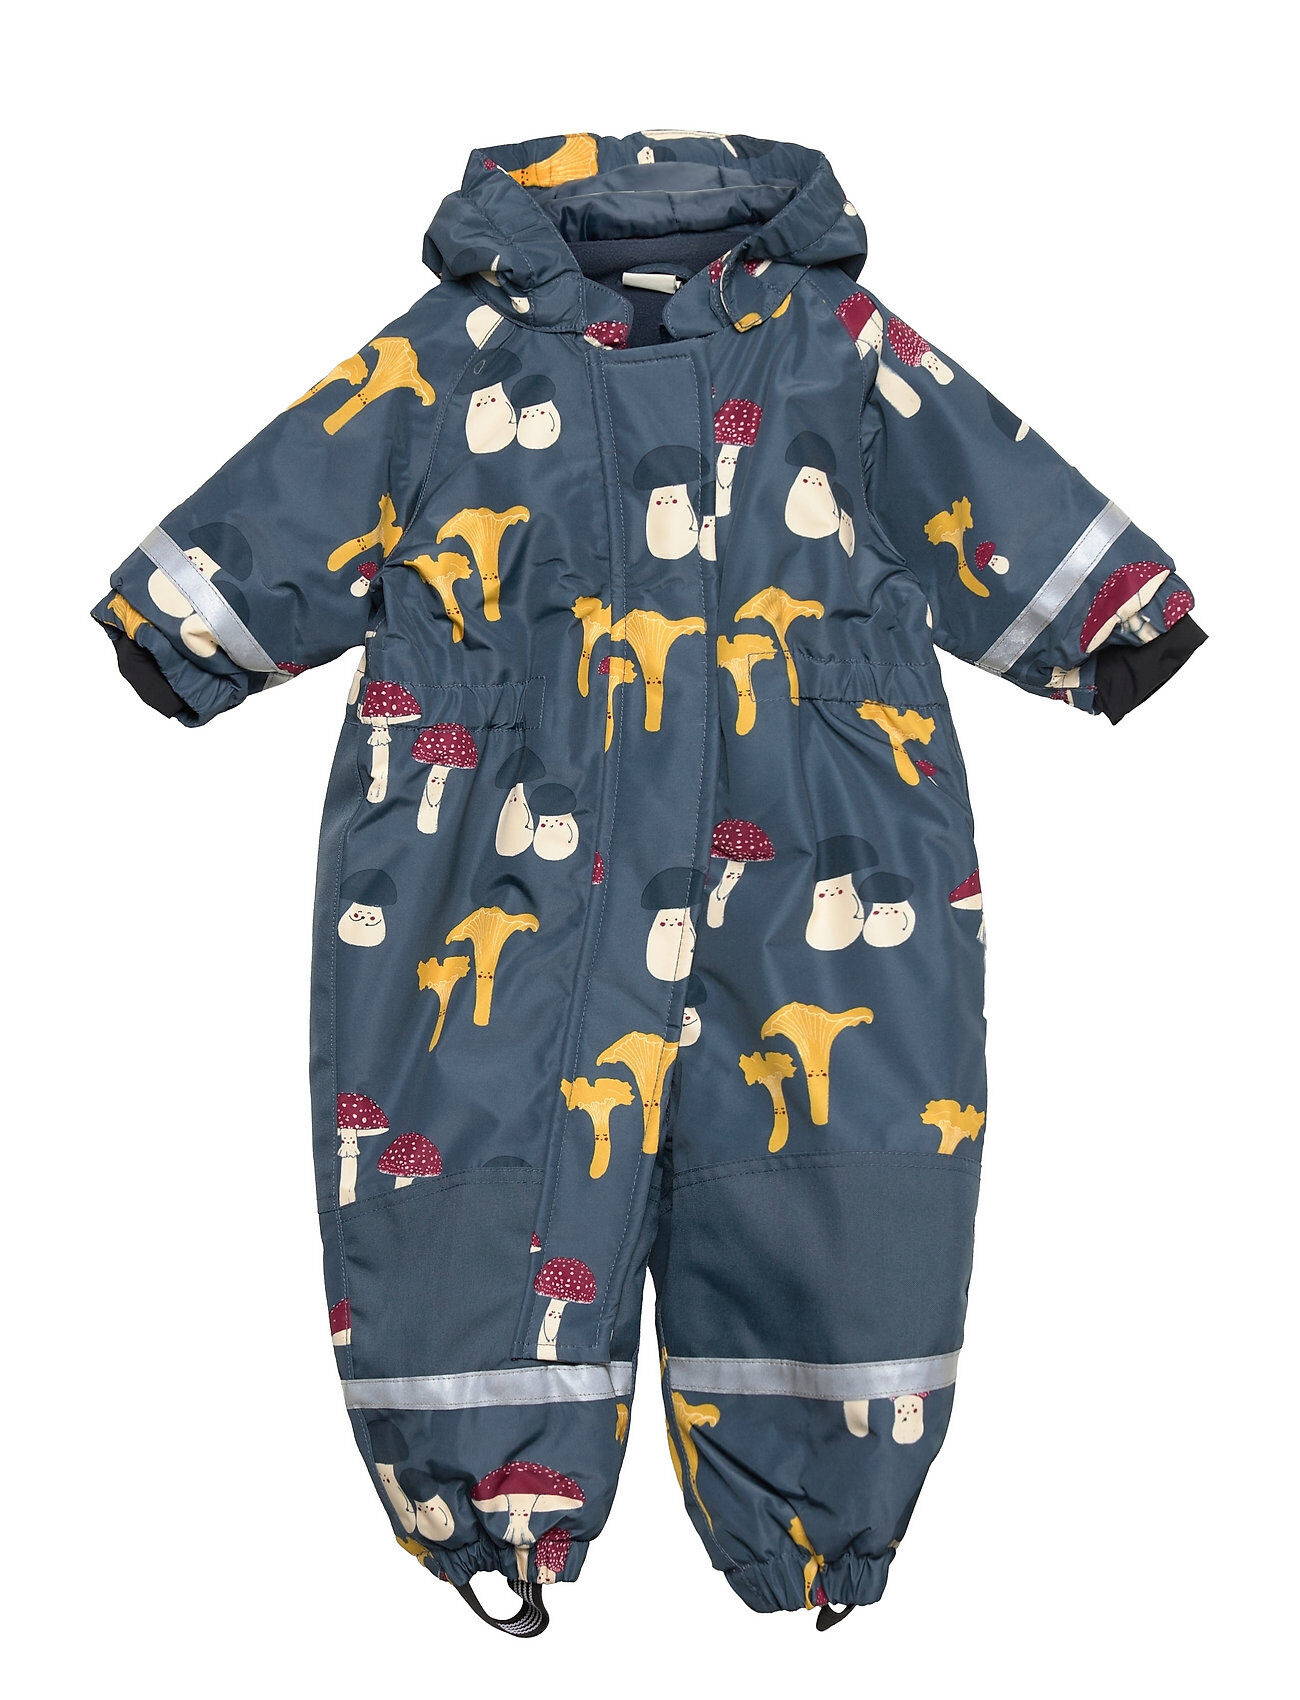 Lindex Overall Functional Taslan Aop Outerwear Coveralls Rainwear Sets & Coveralls Multi/mønstret Lindex